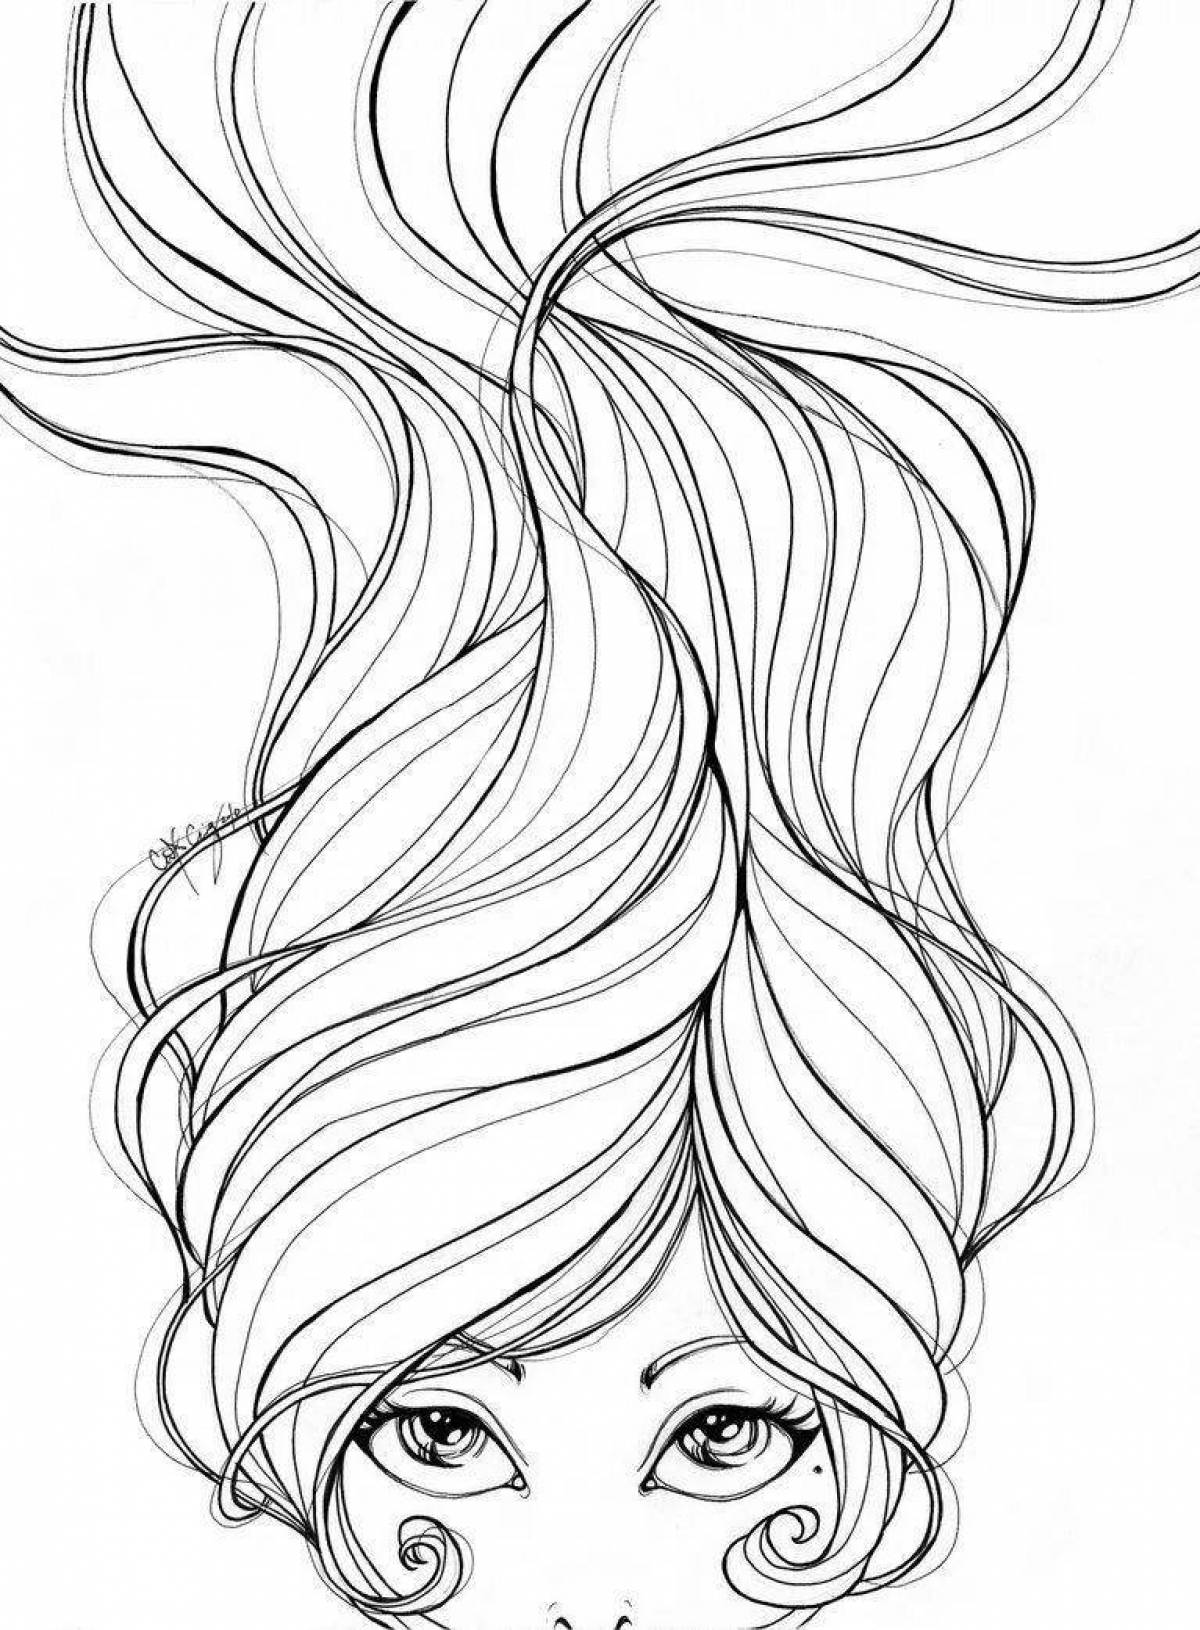 Sparkly girls hair coloring page